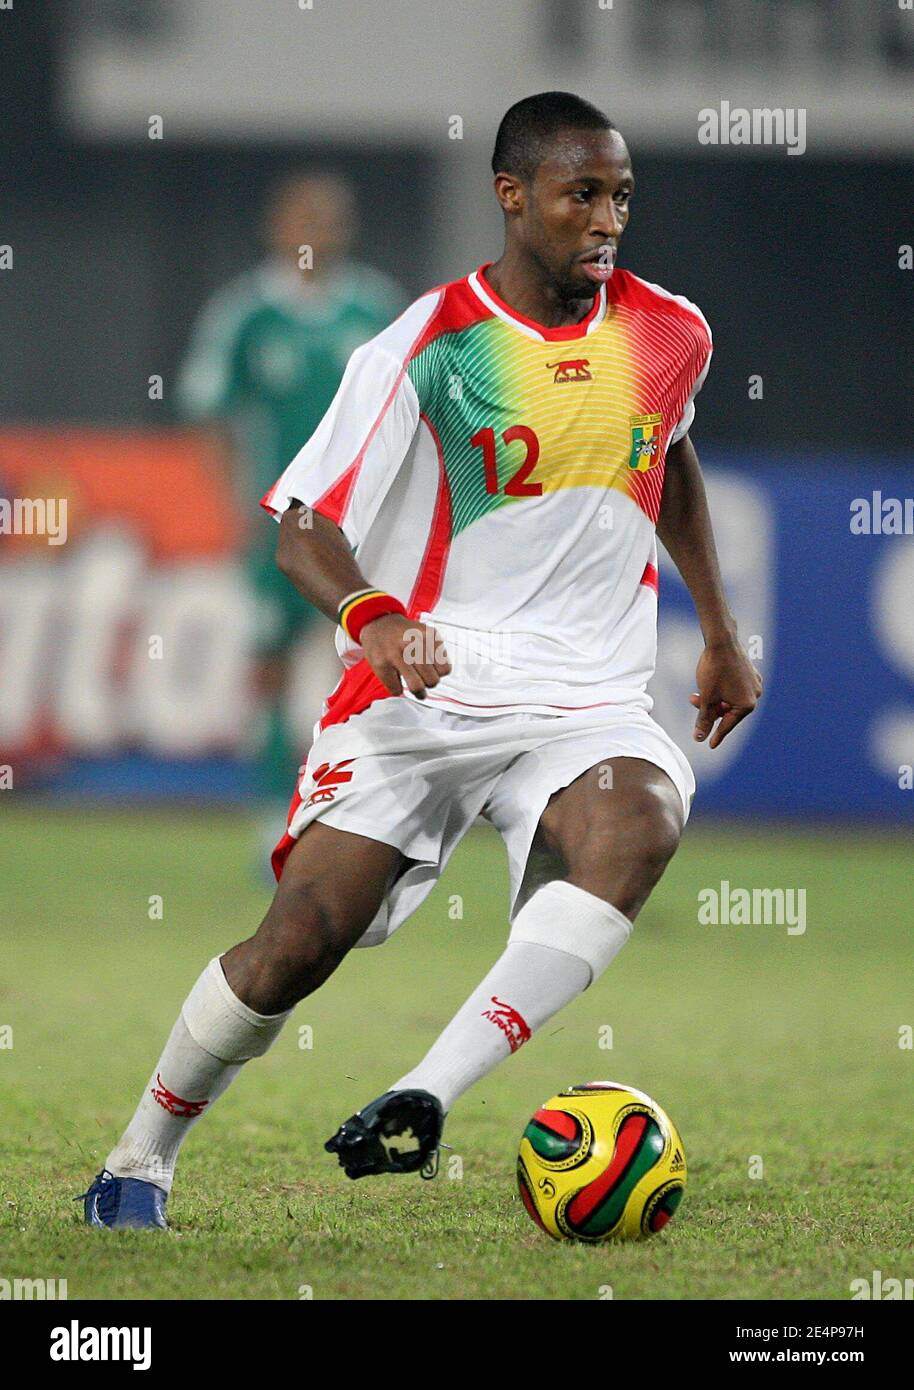 https://c8.alamy.com/comp/2E4P97H/malis-seydou-keita-during-the-african-cup-of-nations-soccer-match-ivory-nigeria-vs-mali-in-sekondi-ghana-on-january-25-2008-the-match-ended-in-a-0-0-draw-the-future-of-german-coach-berti-vogts-will-be-discussed-by-the-board-of-the-nigeria-football-association-nfa-after-the-super-eagles-failed-to-beat-mali-in-a-decisive-group-b-match-and-now-risk-a-first-round-elimination-from-the-2008-africa-cup-of-nationsphoto-by-steeve-mcmaycameleonabacapresscom-2E4P97H.jpg